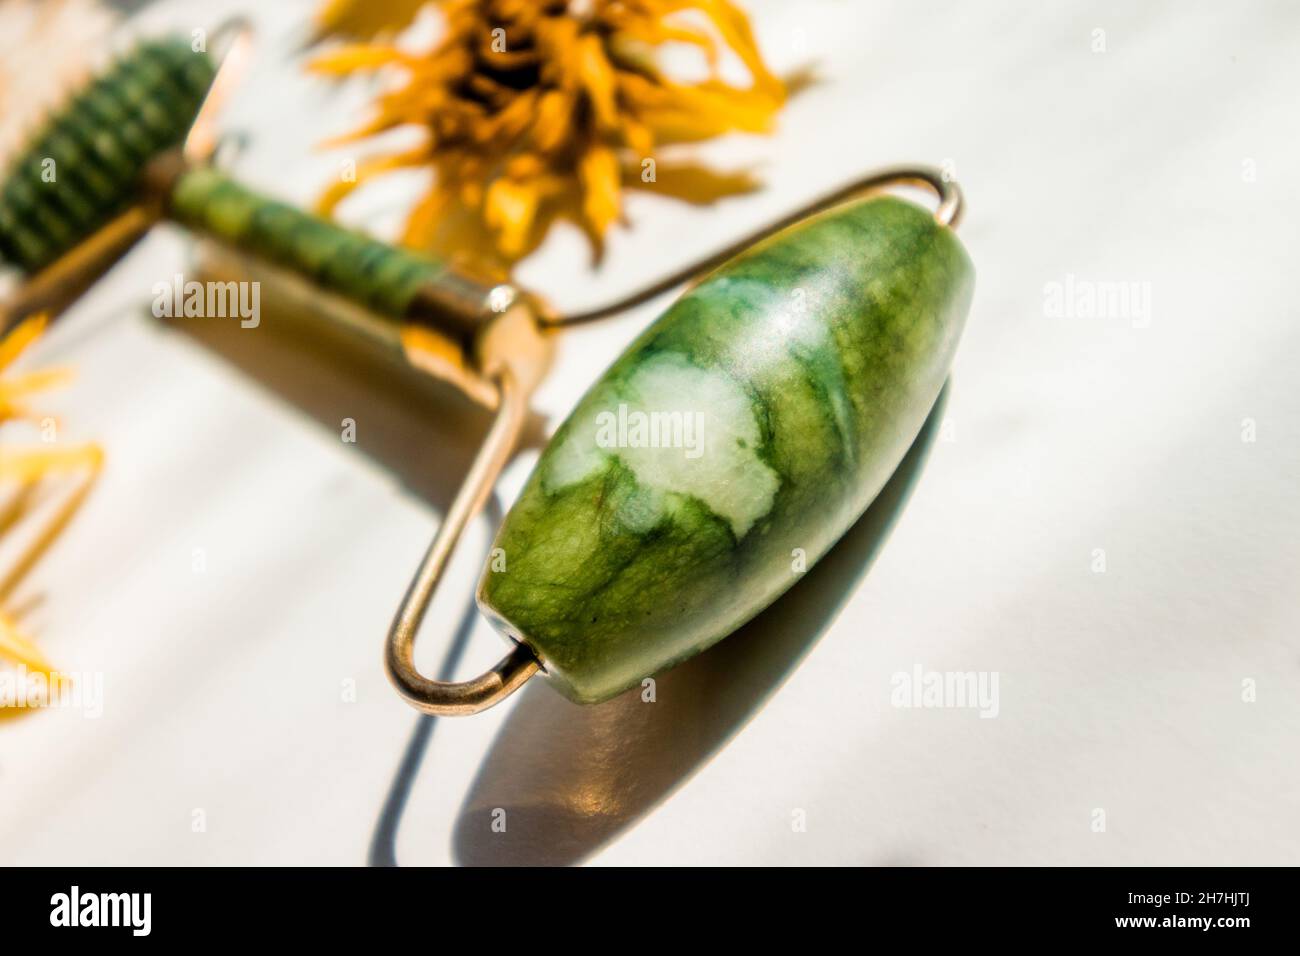 Green jade roller facial massager close-up on a background of dry buds.  Stock Photo